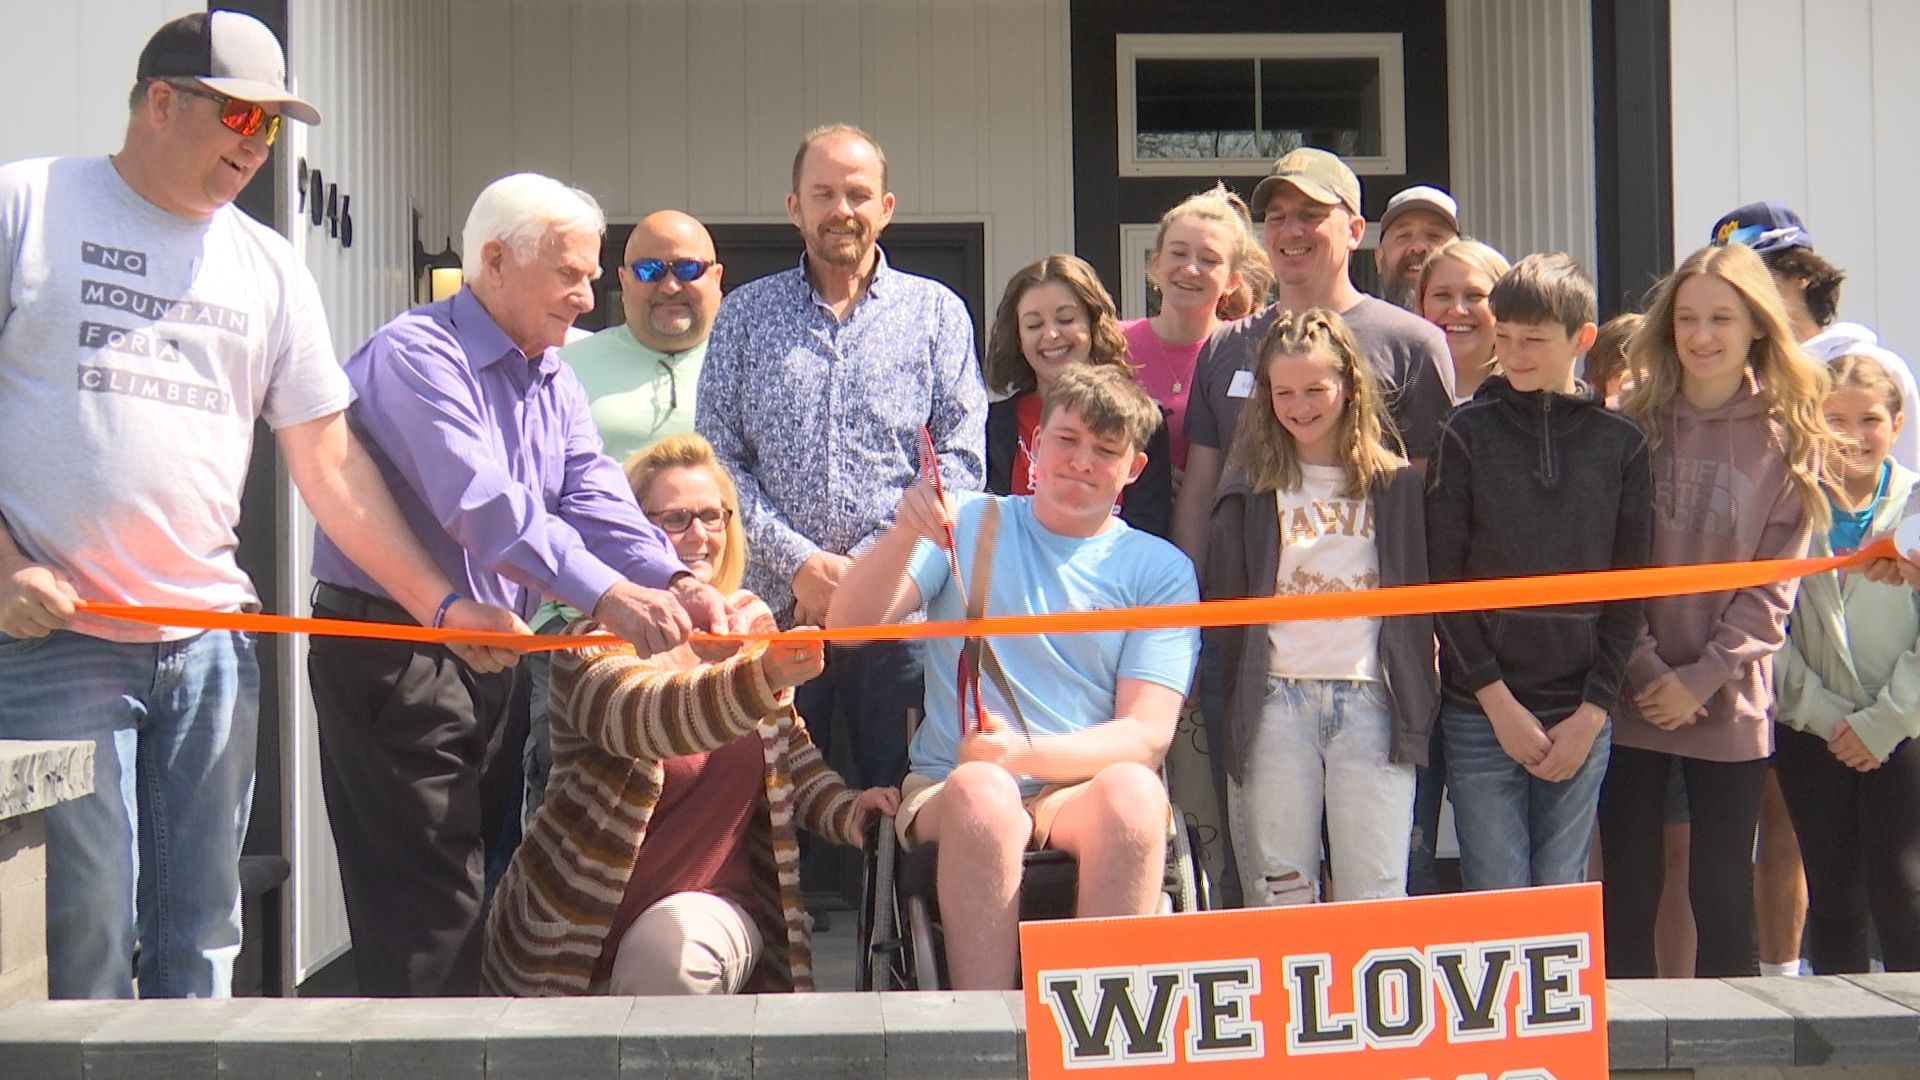 When Lucas left the hospital, it wasn't his injury that was slowing him down. It was his home. But a local company and the community made that a thing of the past.